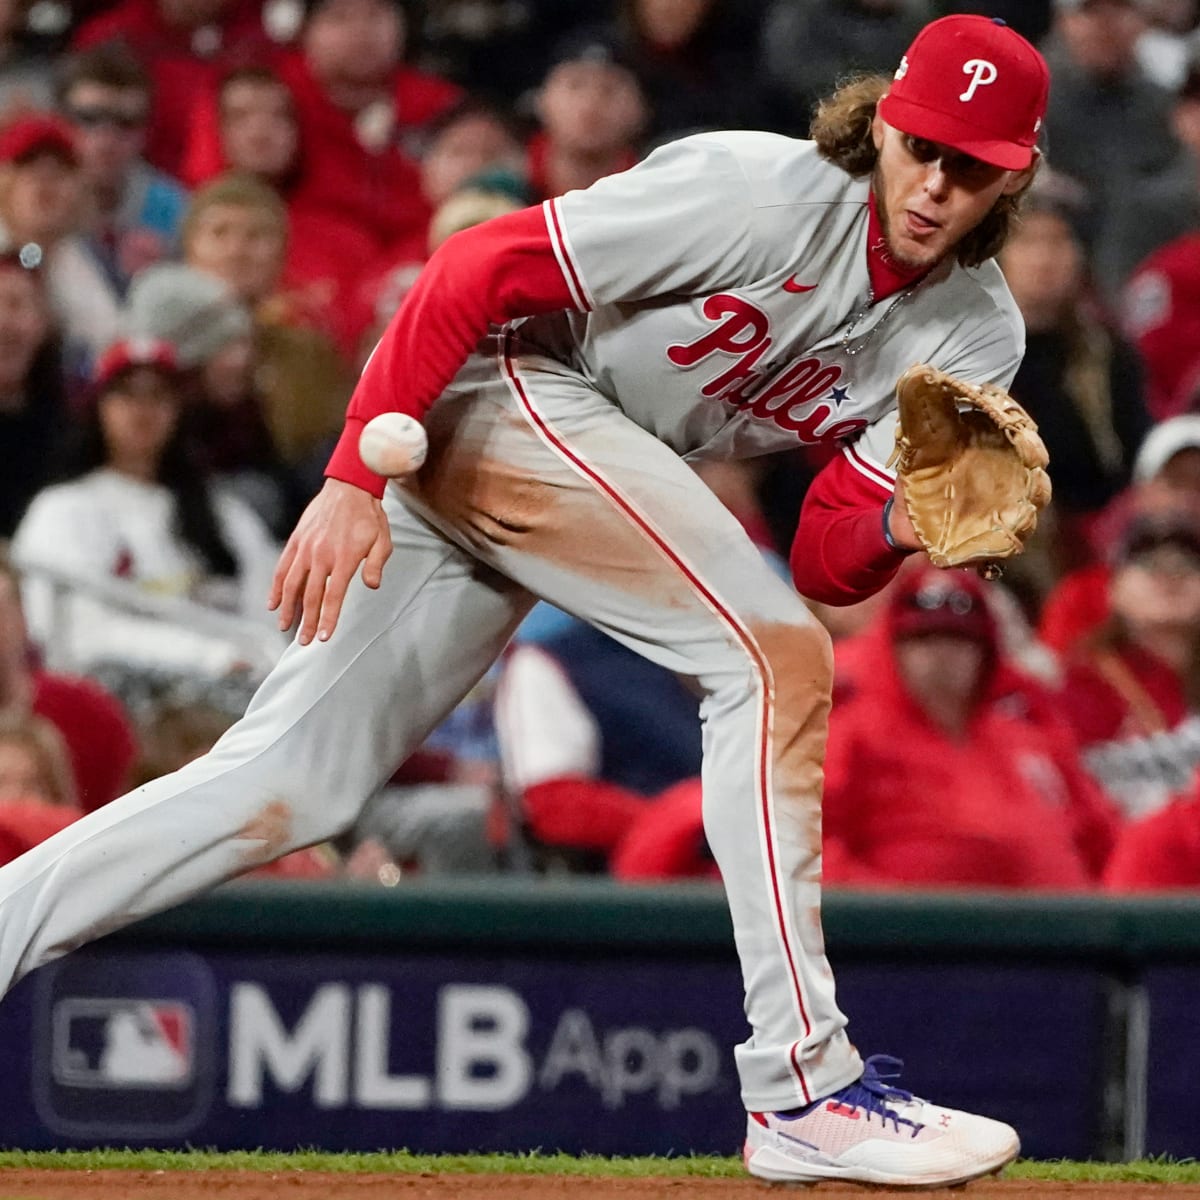 Phillies in a bind with Alec Bohm, but a demotion could revive the